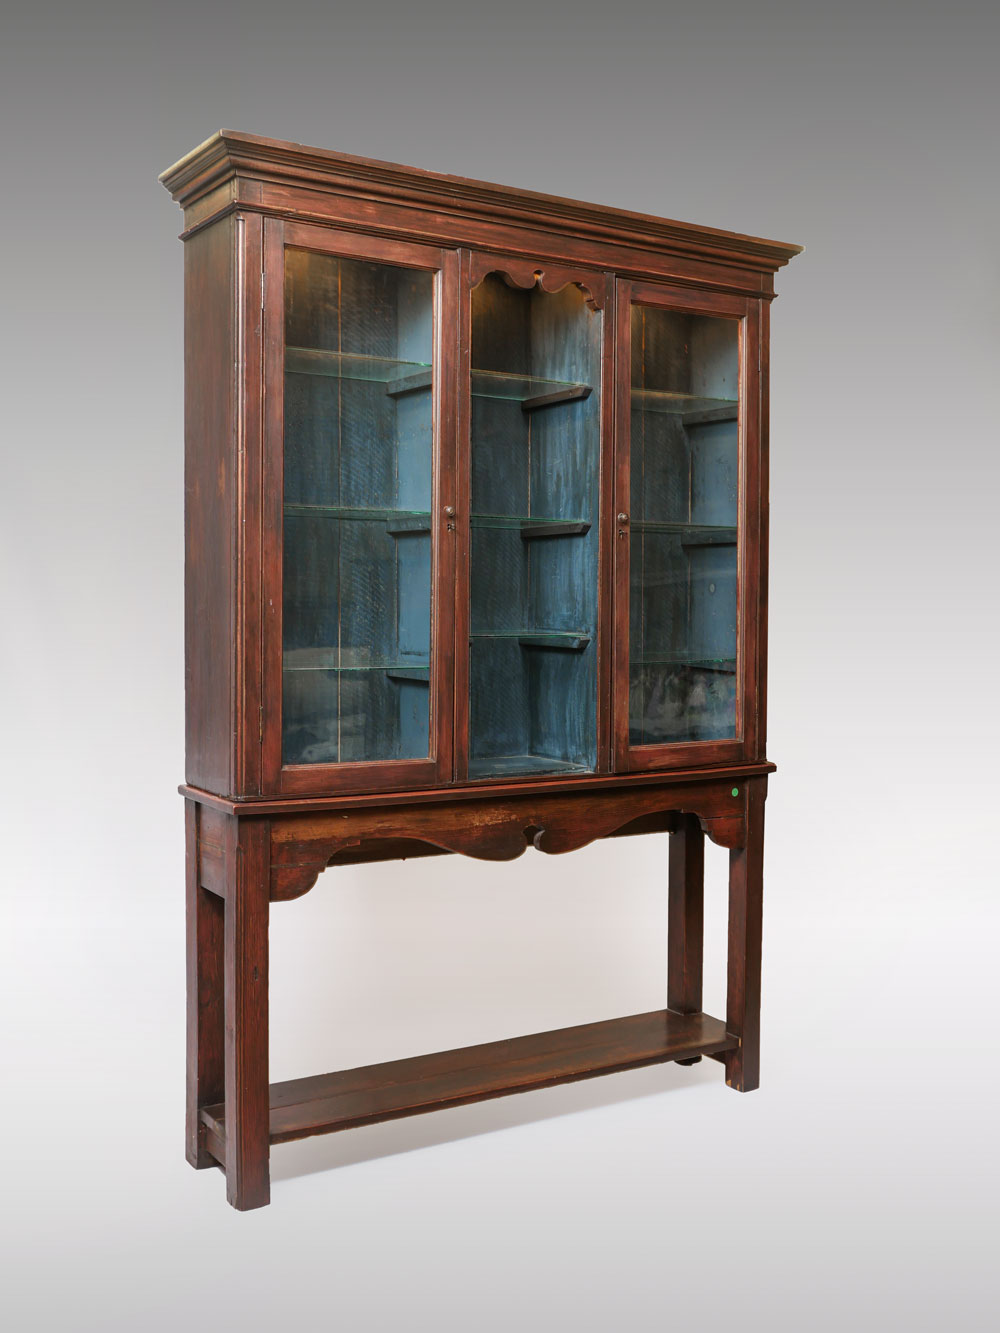 LARGE EARLY GLASS DISPLAY CABINET: